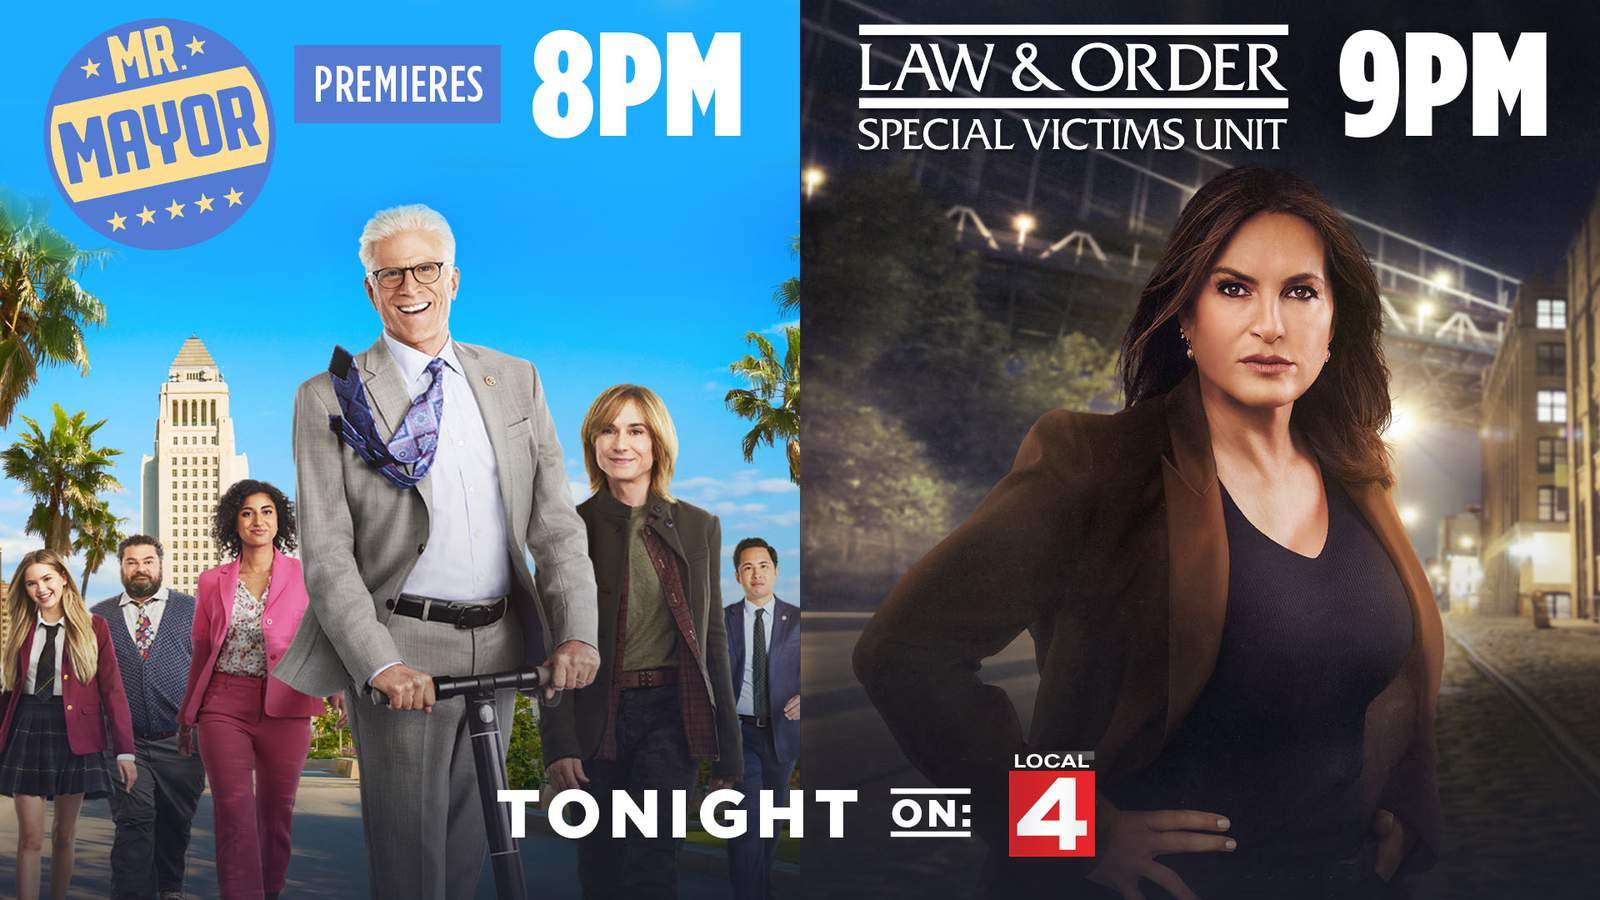 ‘Mr. Mayor’ series premiere followed by an all-new Law & Order: SVU